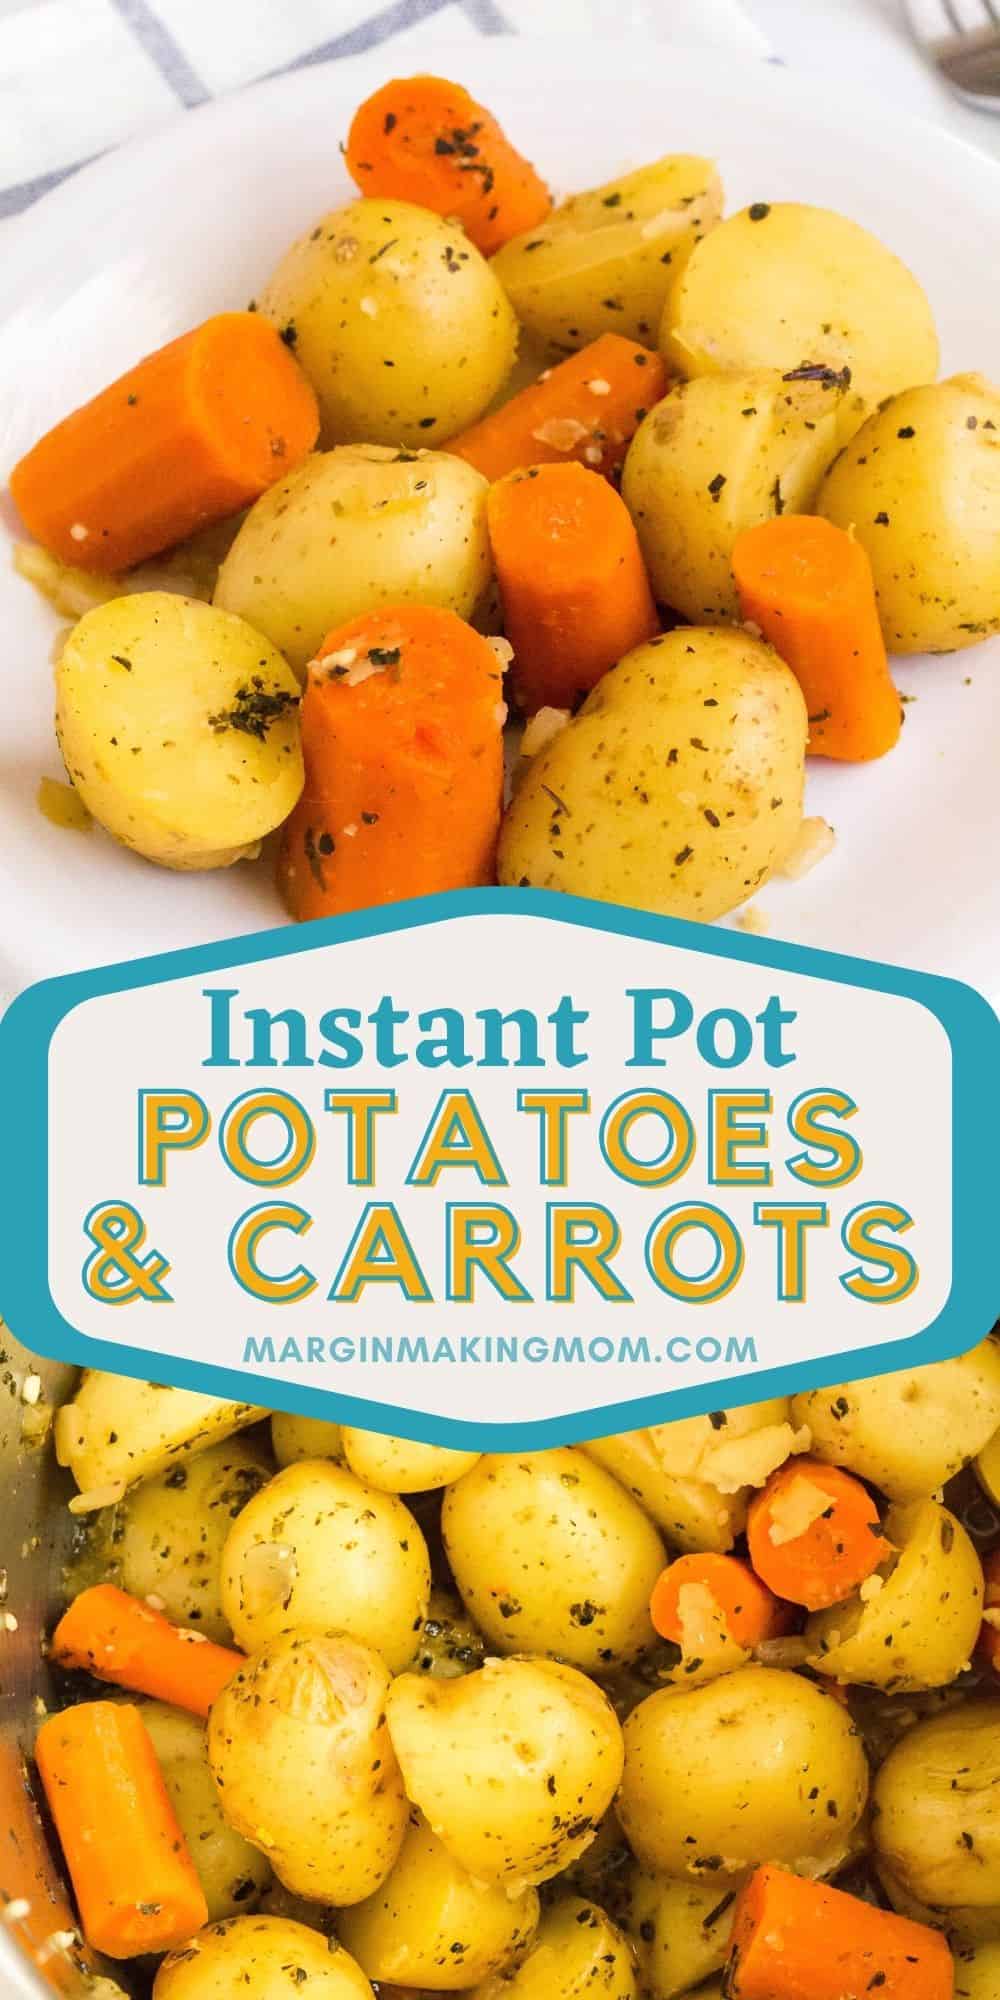 Collage image featuring two photos of Instant Pot potatoes and carrots--one photo is of the vegetables in the insert pot of the Instant Pot, the other photo is of a serving of veggies on a white plate